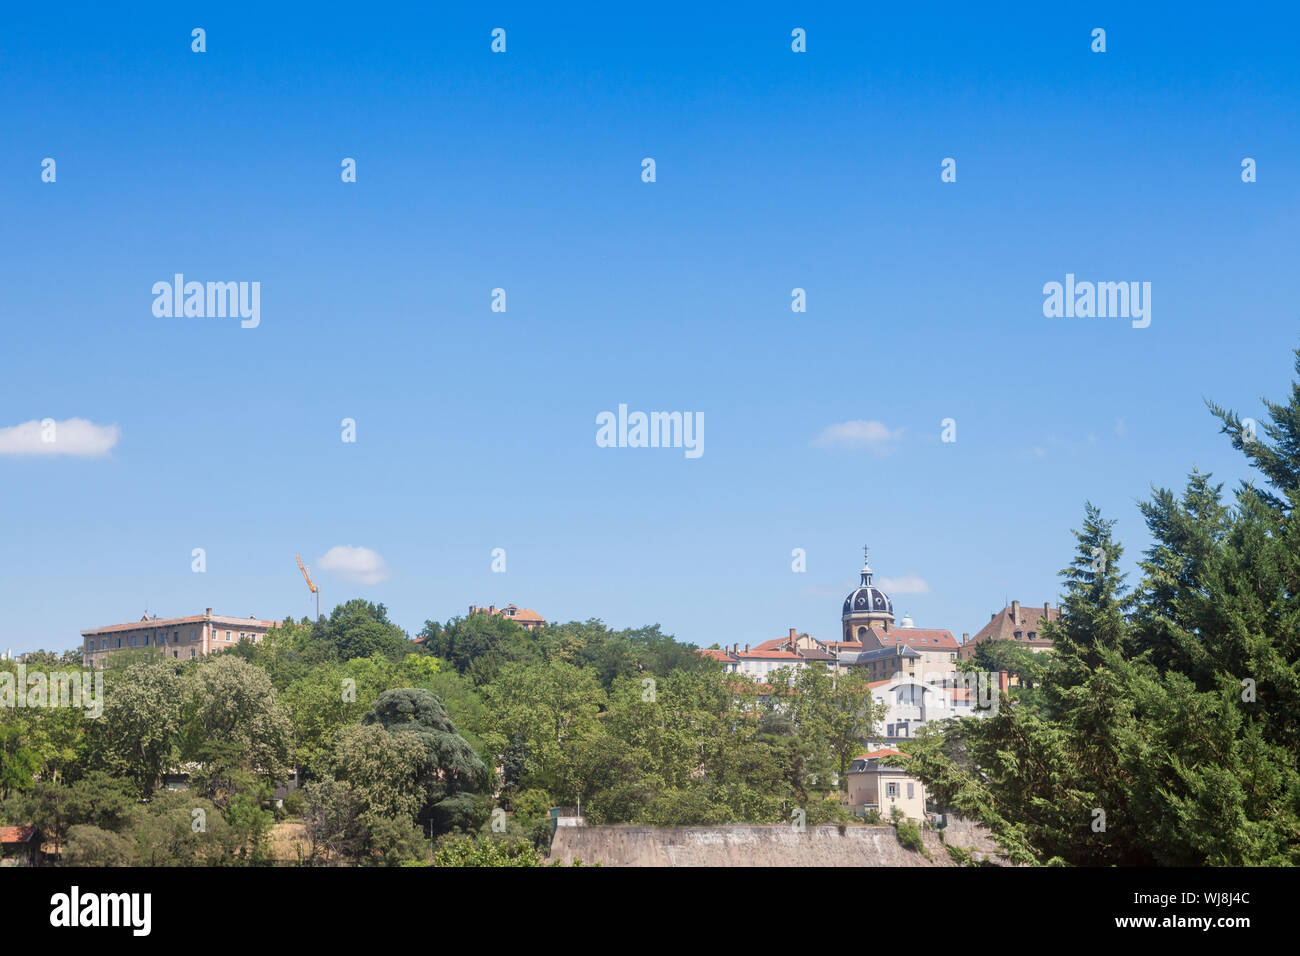 Panorama of Colline de la Croix Rousse Hill with a focus on Chartreux district in Lyon, France, with the roman catholic church of Saint Bruno des Char Stock Photo